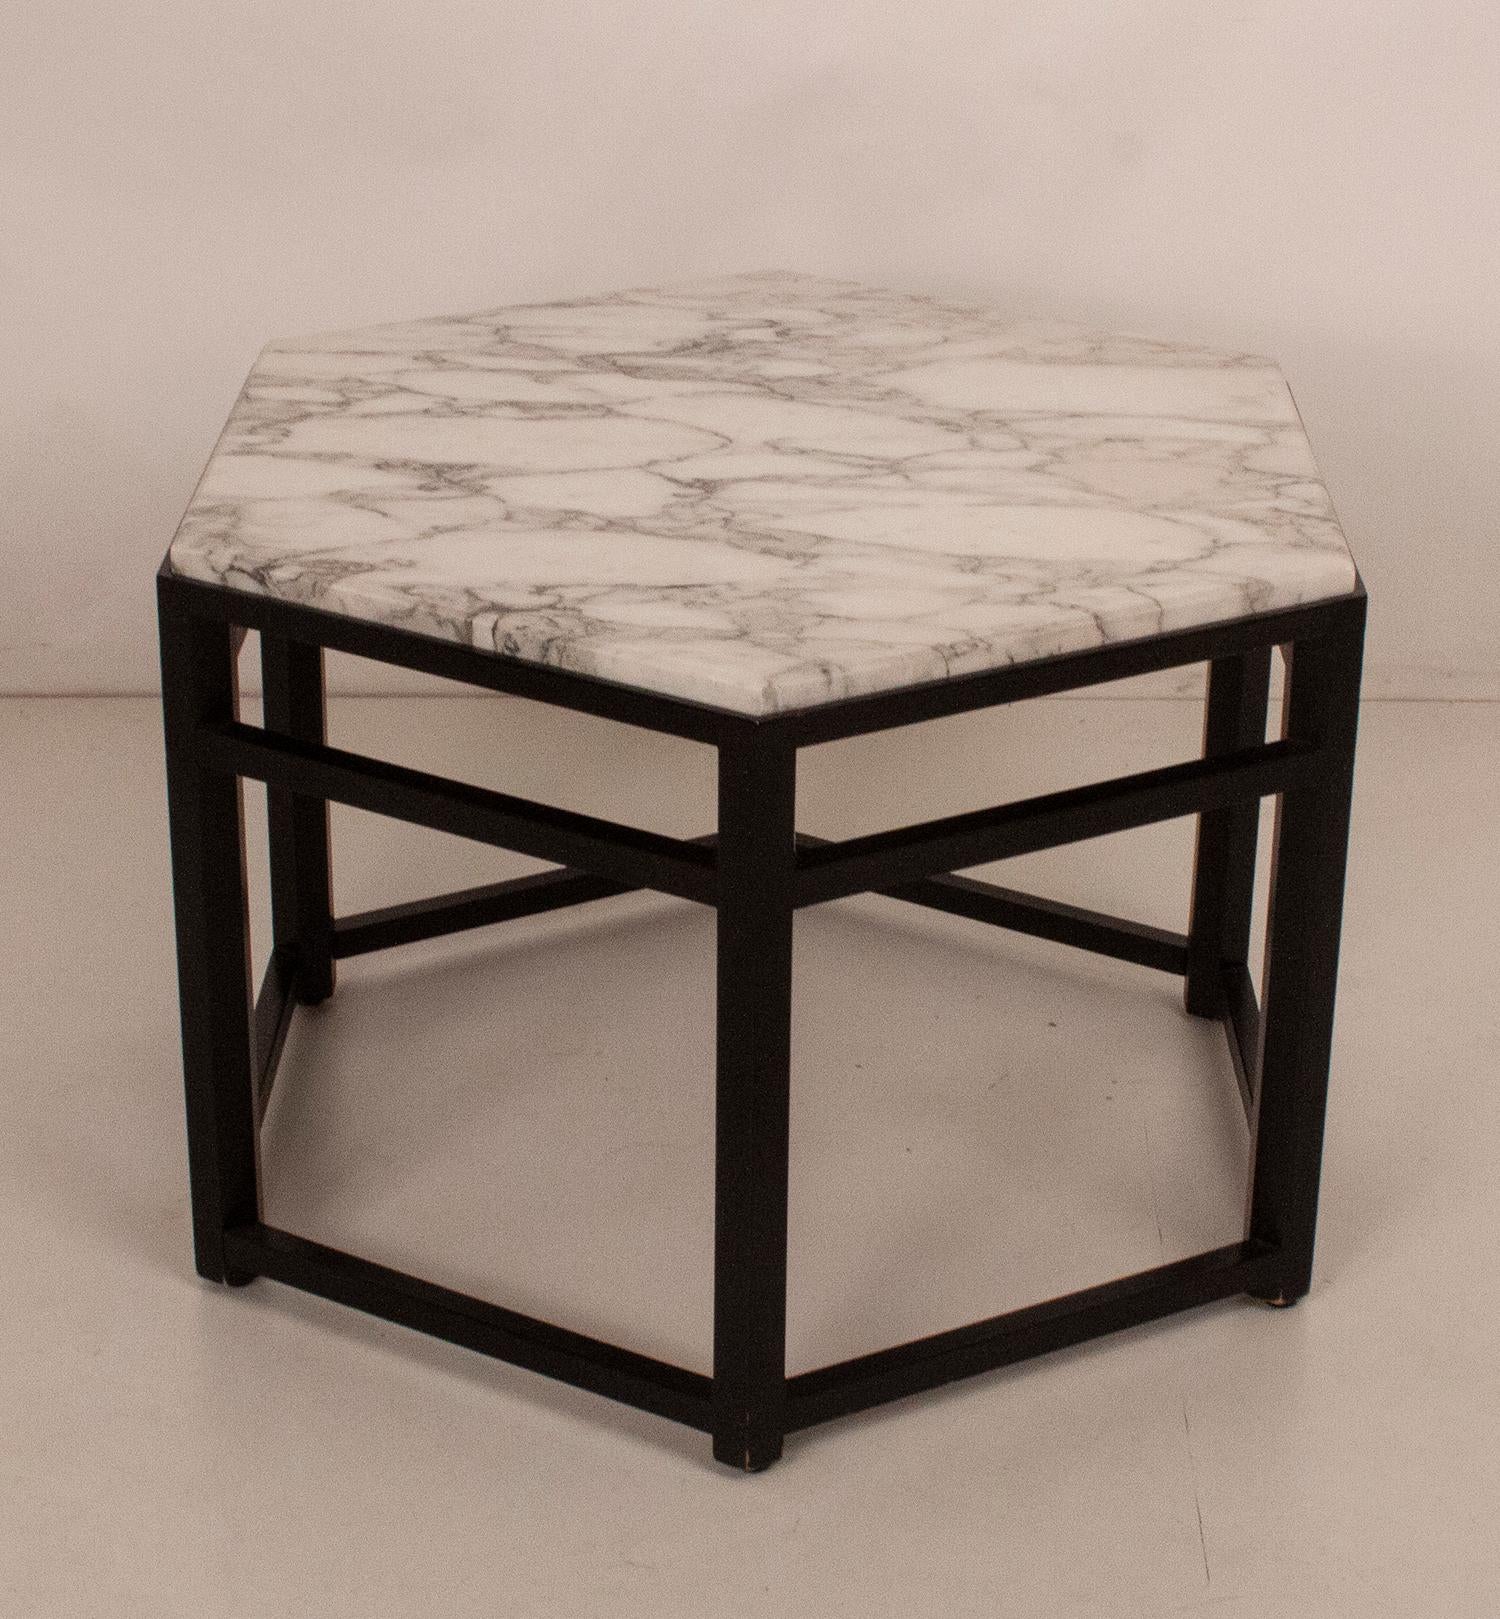 Mid century modern hexagonal Italian side table in arabescato marble and structure in black lacquered wood.
It is hexagonal in shape, both the marble top and the table structure.
The marble is supported on the structure.
It can serve as a coffee